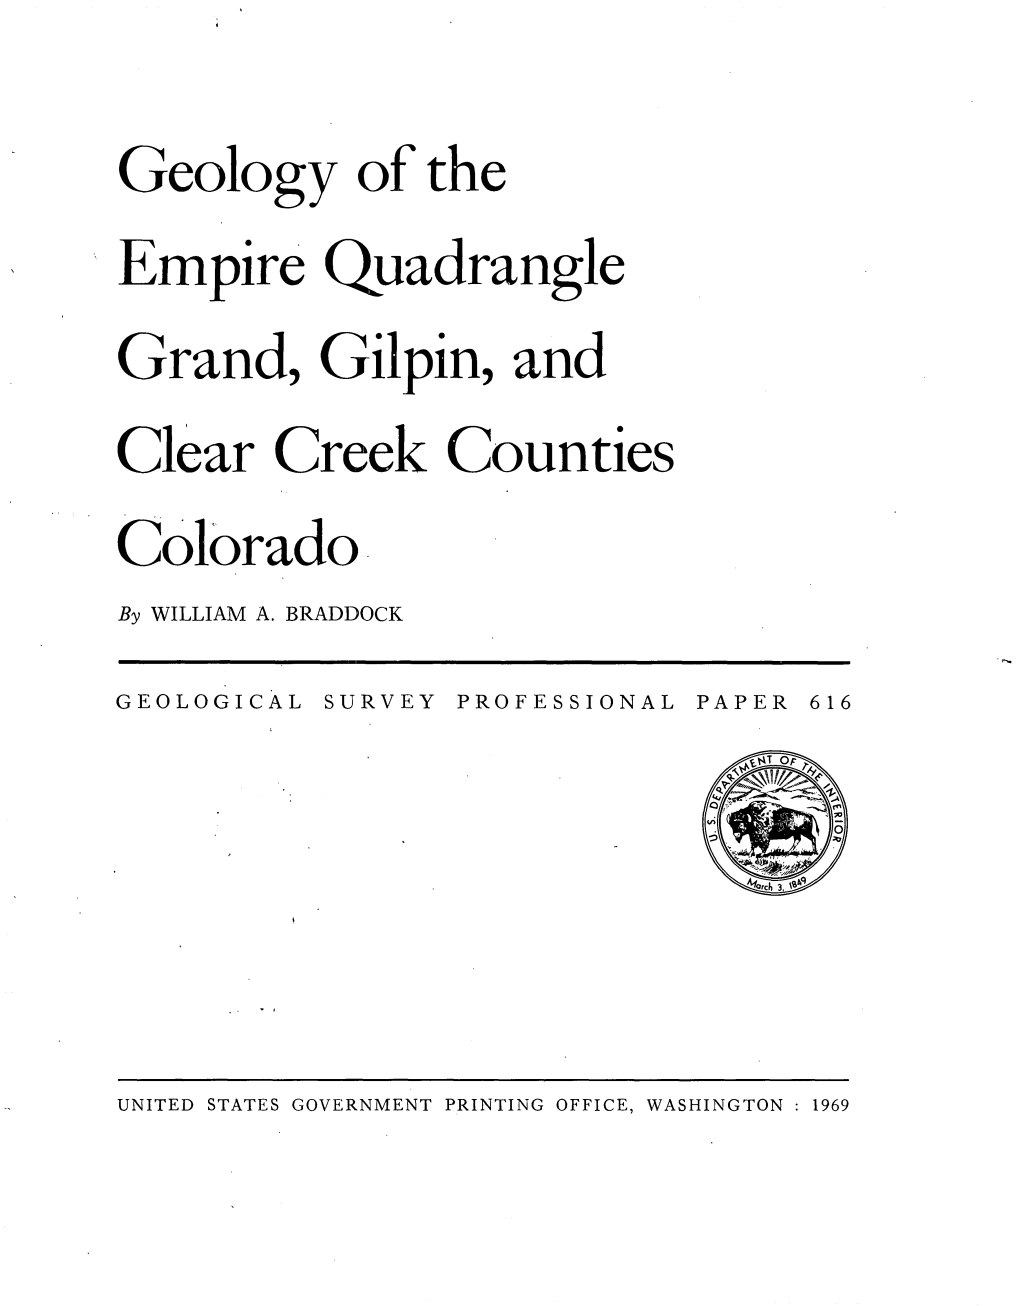 Geology of the Empire Quadrangle Grand, Gilpin, and Clear Creek Counties Colorado